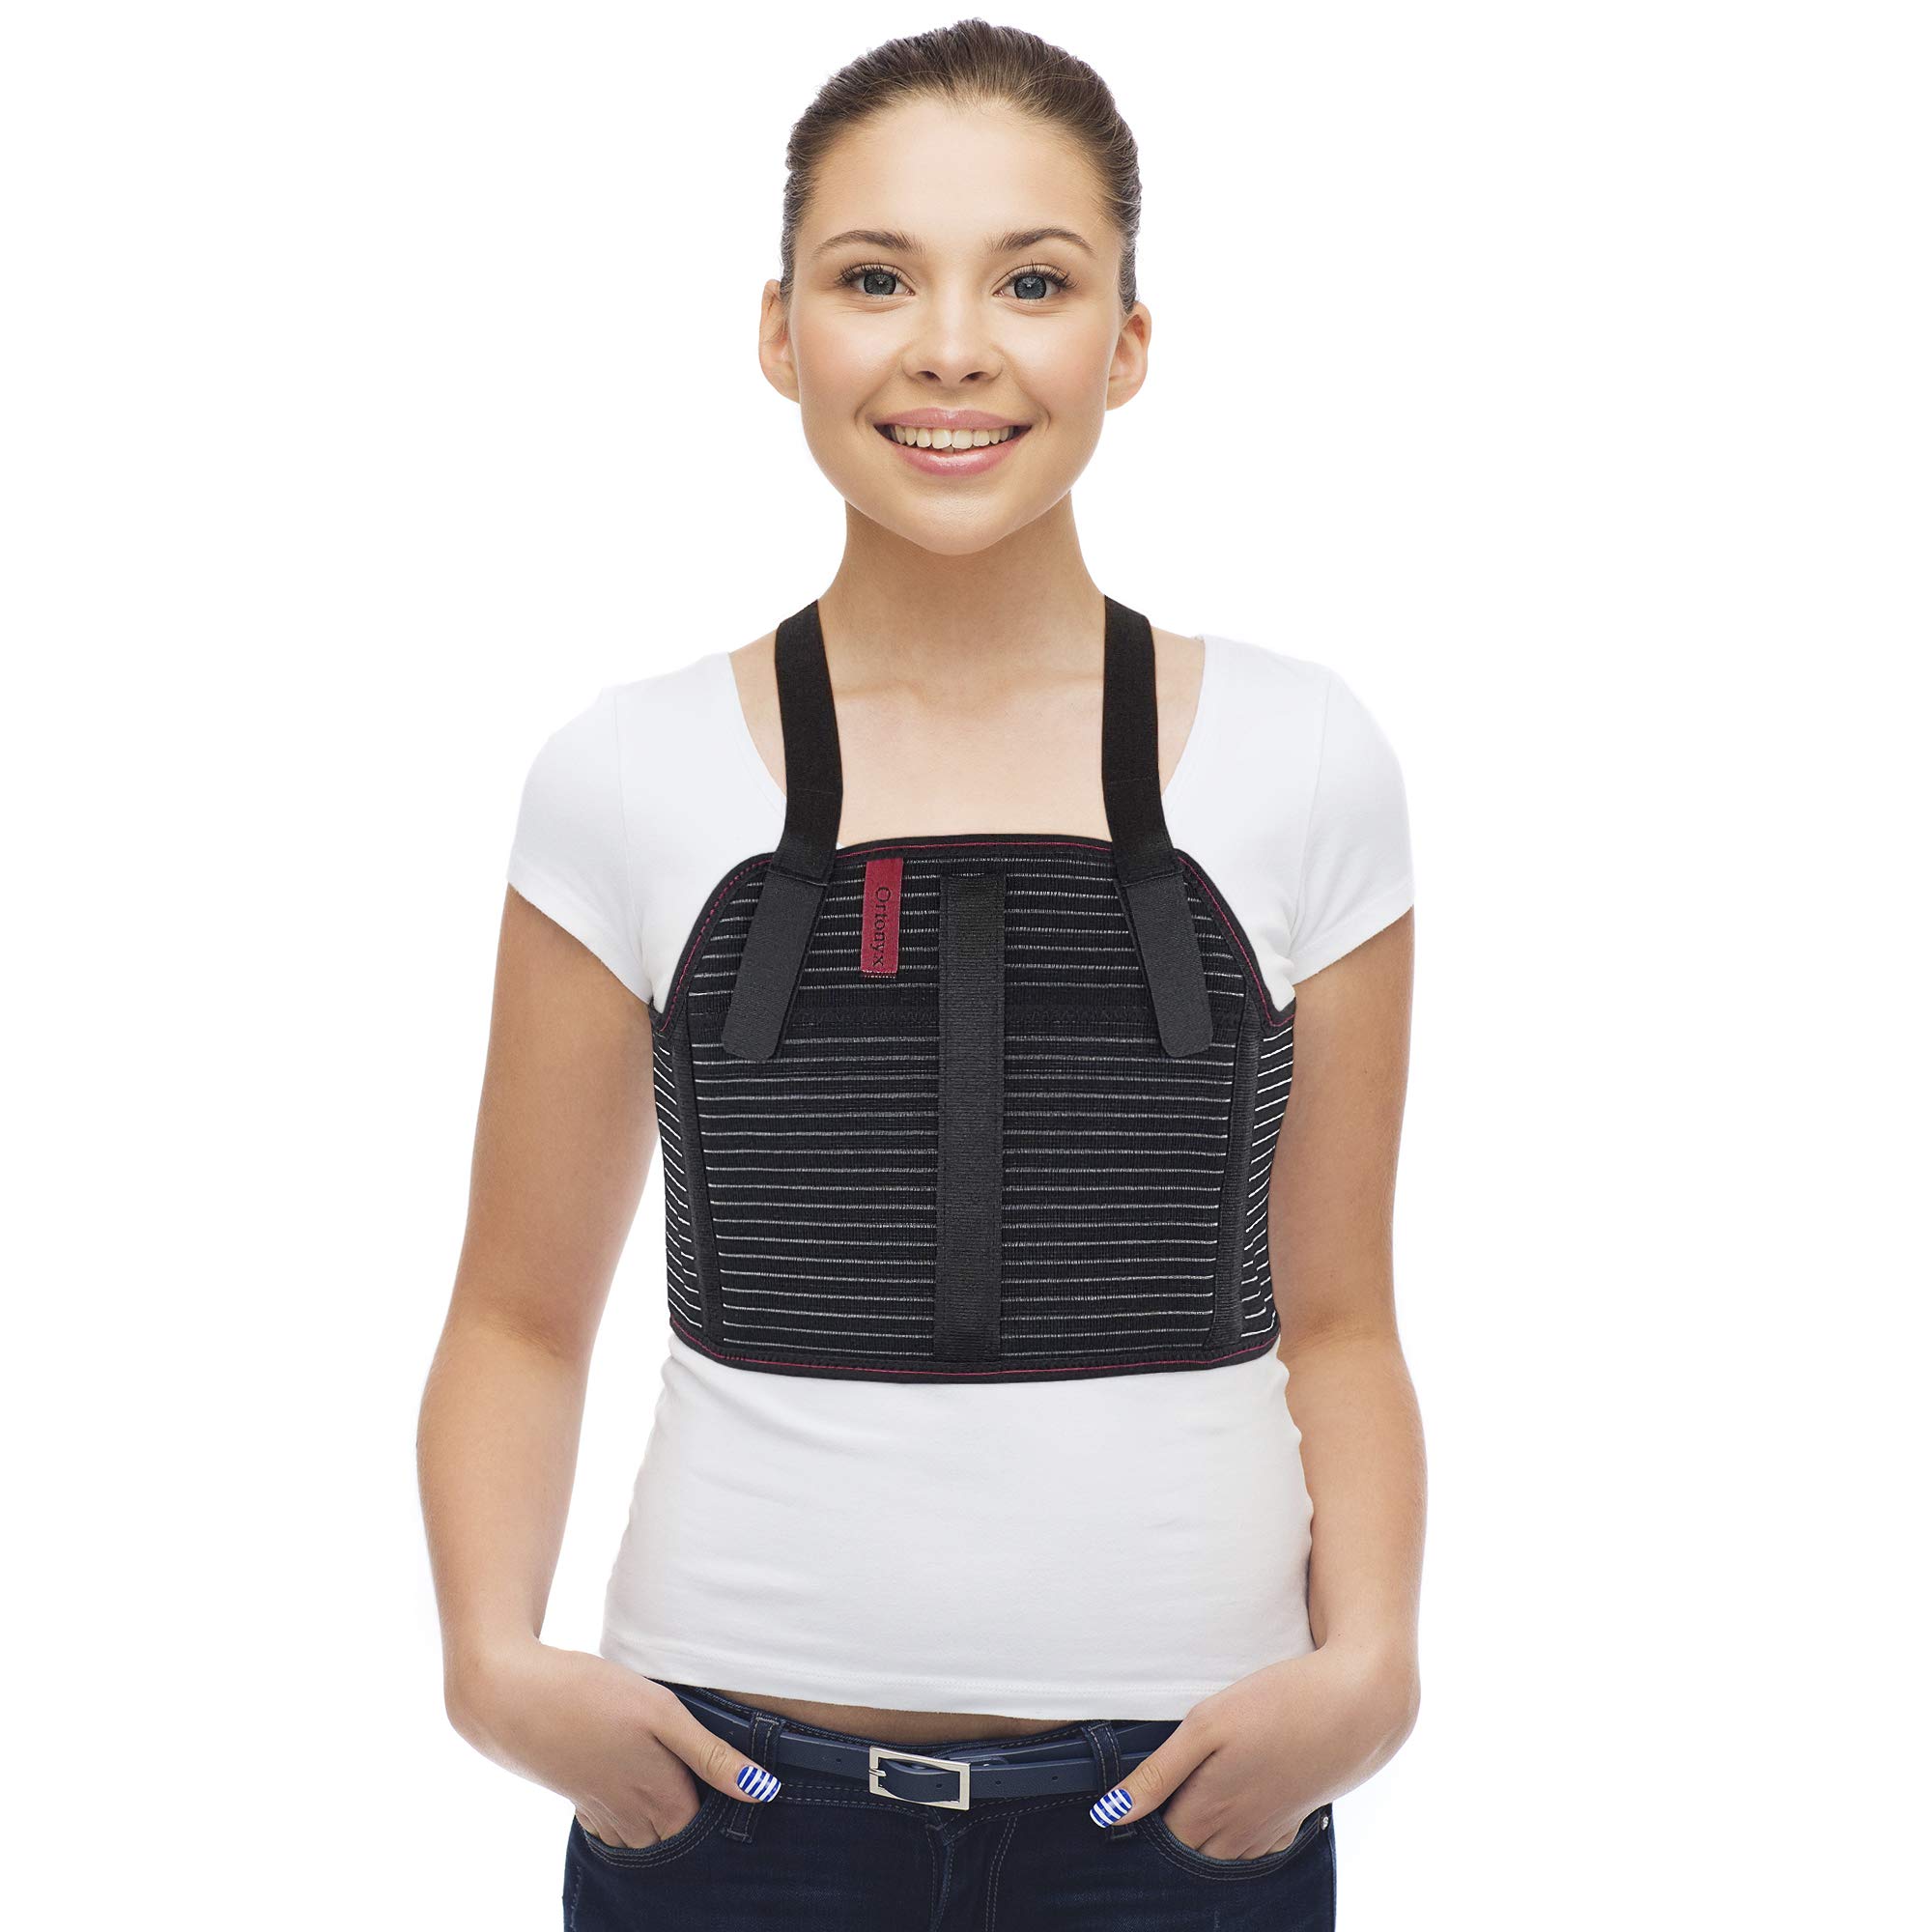  ORTONYX Sternum and Thorax Support Chest Brace Post